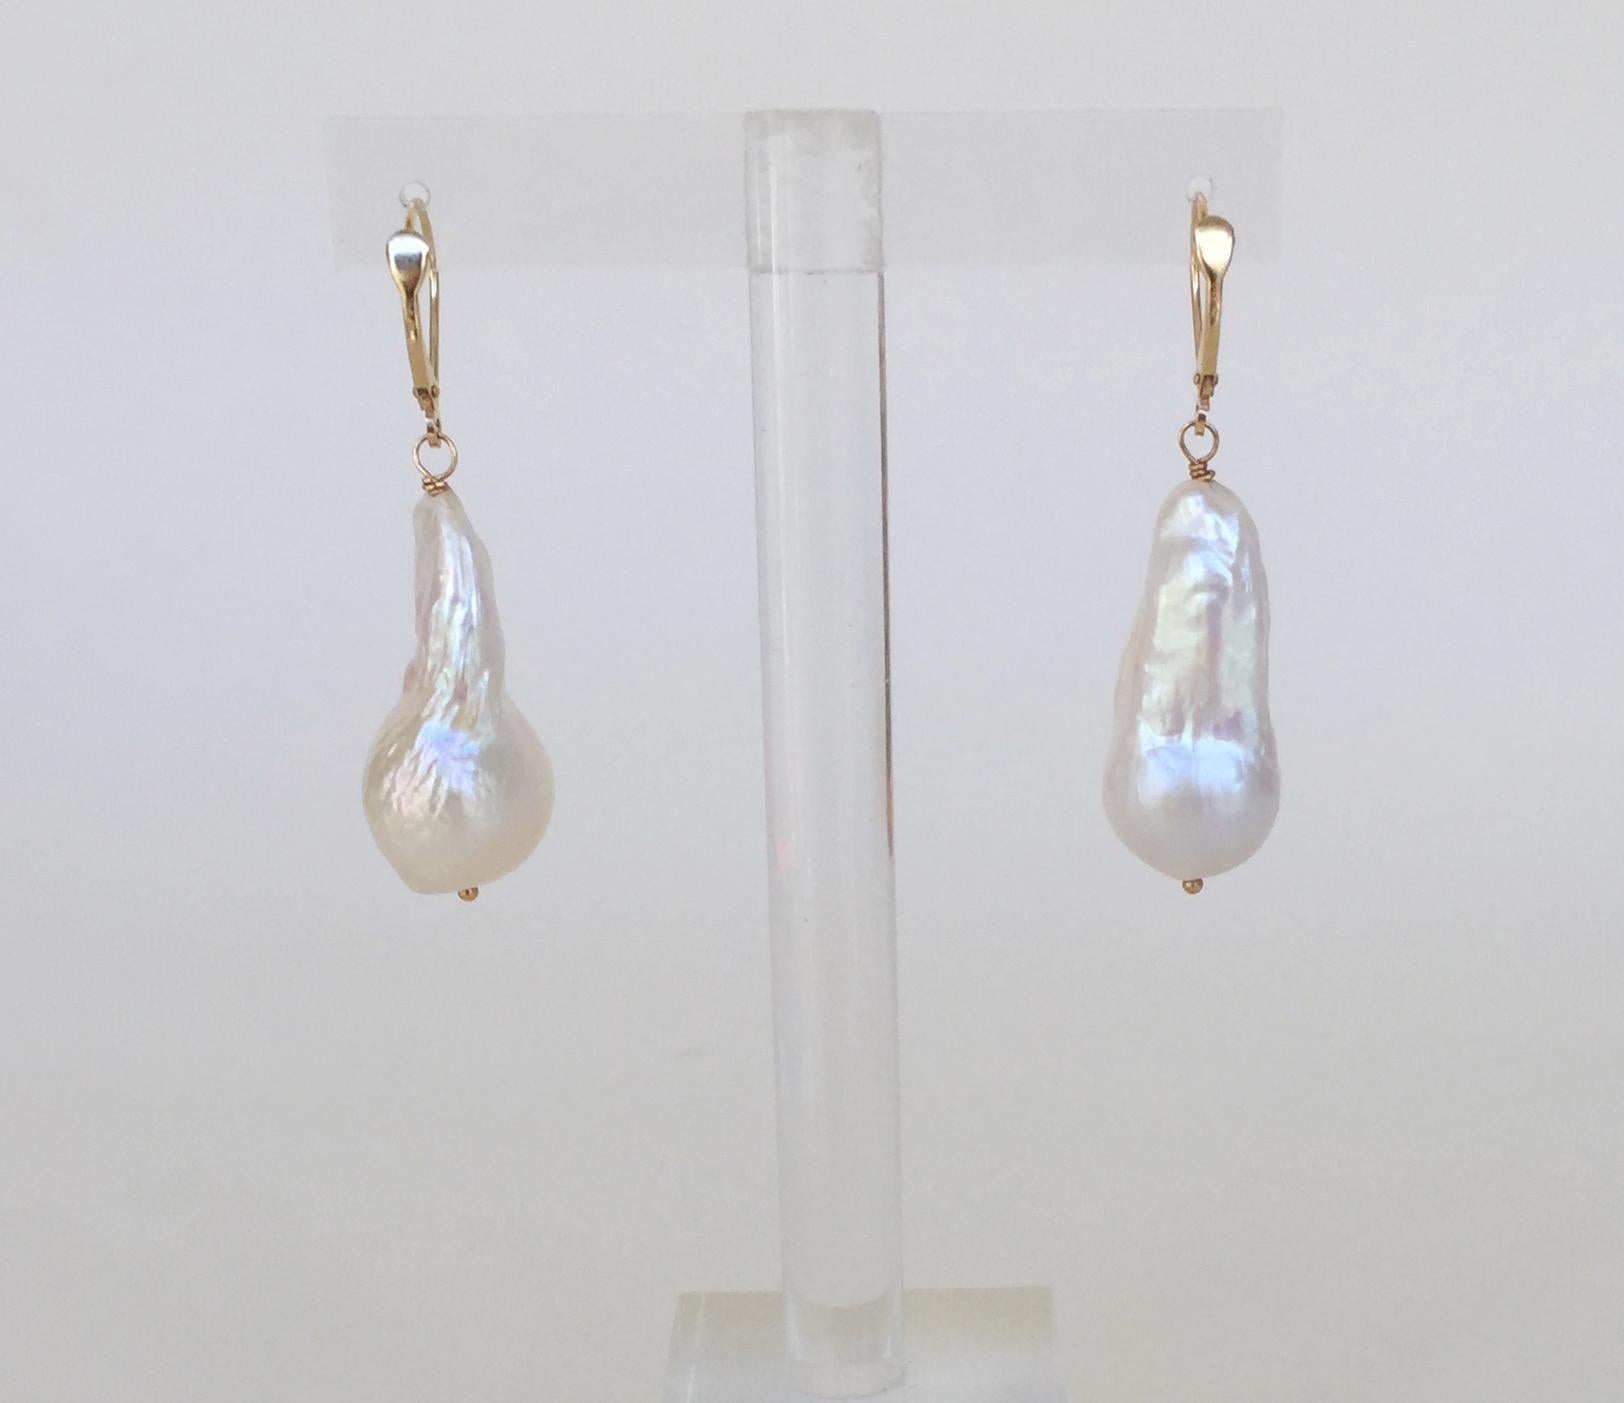 These large tear baroque white pearl drop earrings with 14k yellow gold lever backs are eye-catching and luxurious. With large baroque white pearls, these earrings are a re-invention of the classic drop pearl earrings. These earrings are completed